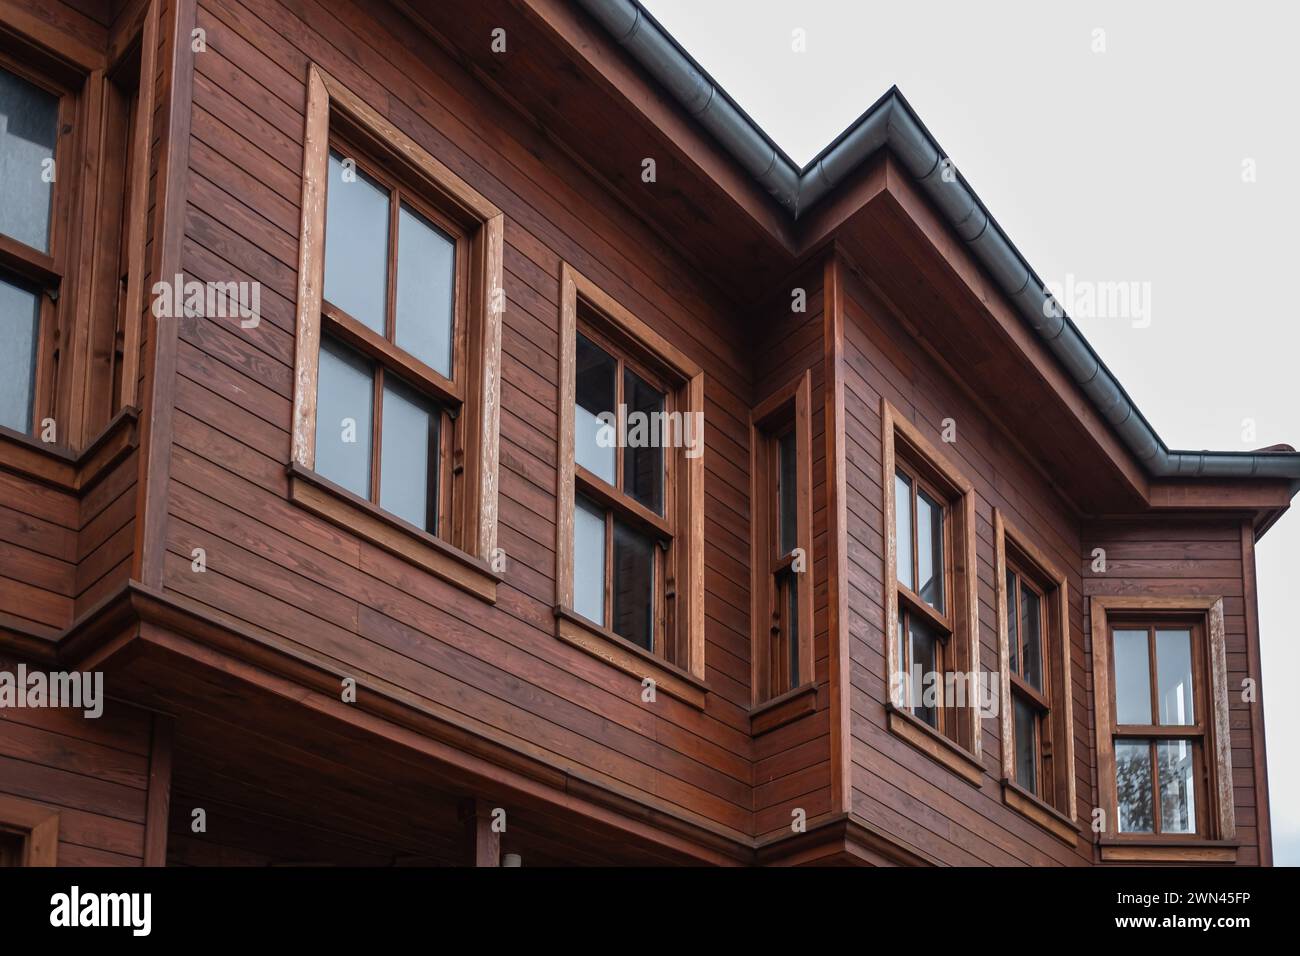 House made of laminated veneer lumber. Cottage made of laminated wood. Houses made of wood. Top of a wooden house and windows. House building made by Stock Photo